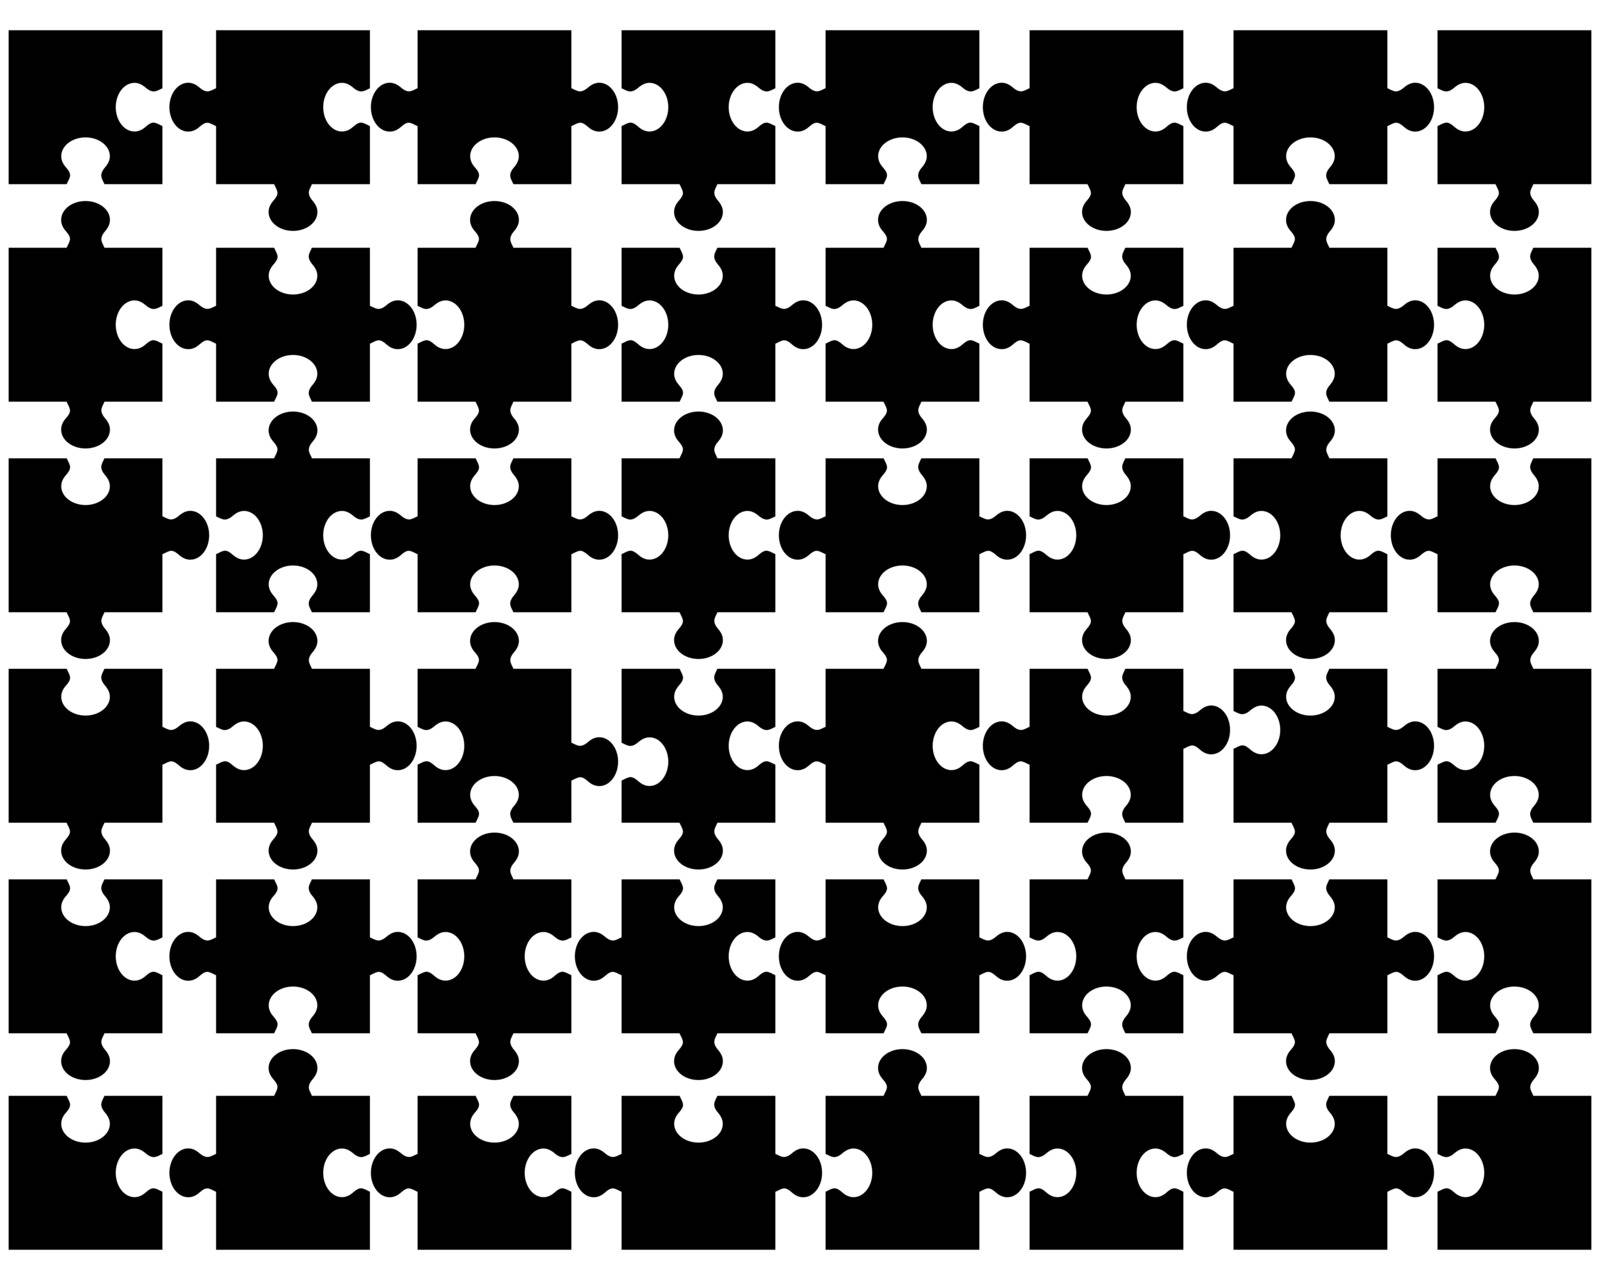 Vector illustration of black puzzle, separate pieces